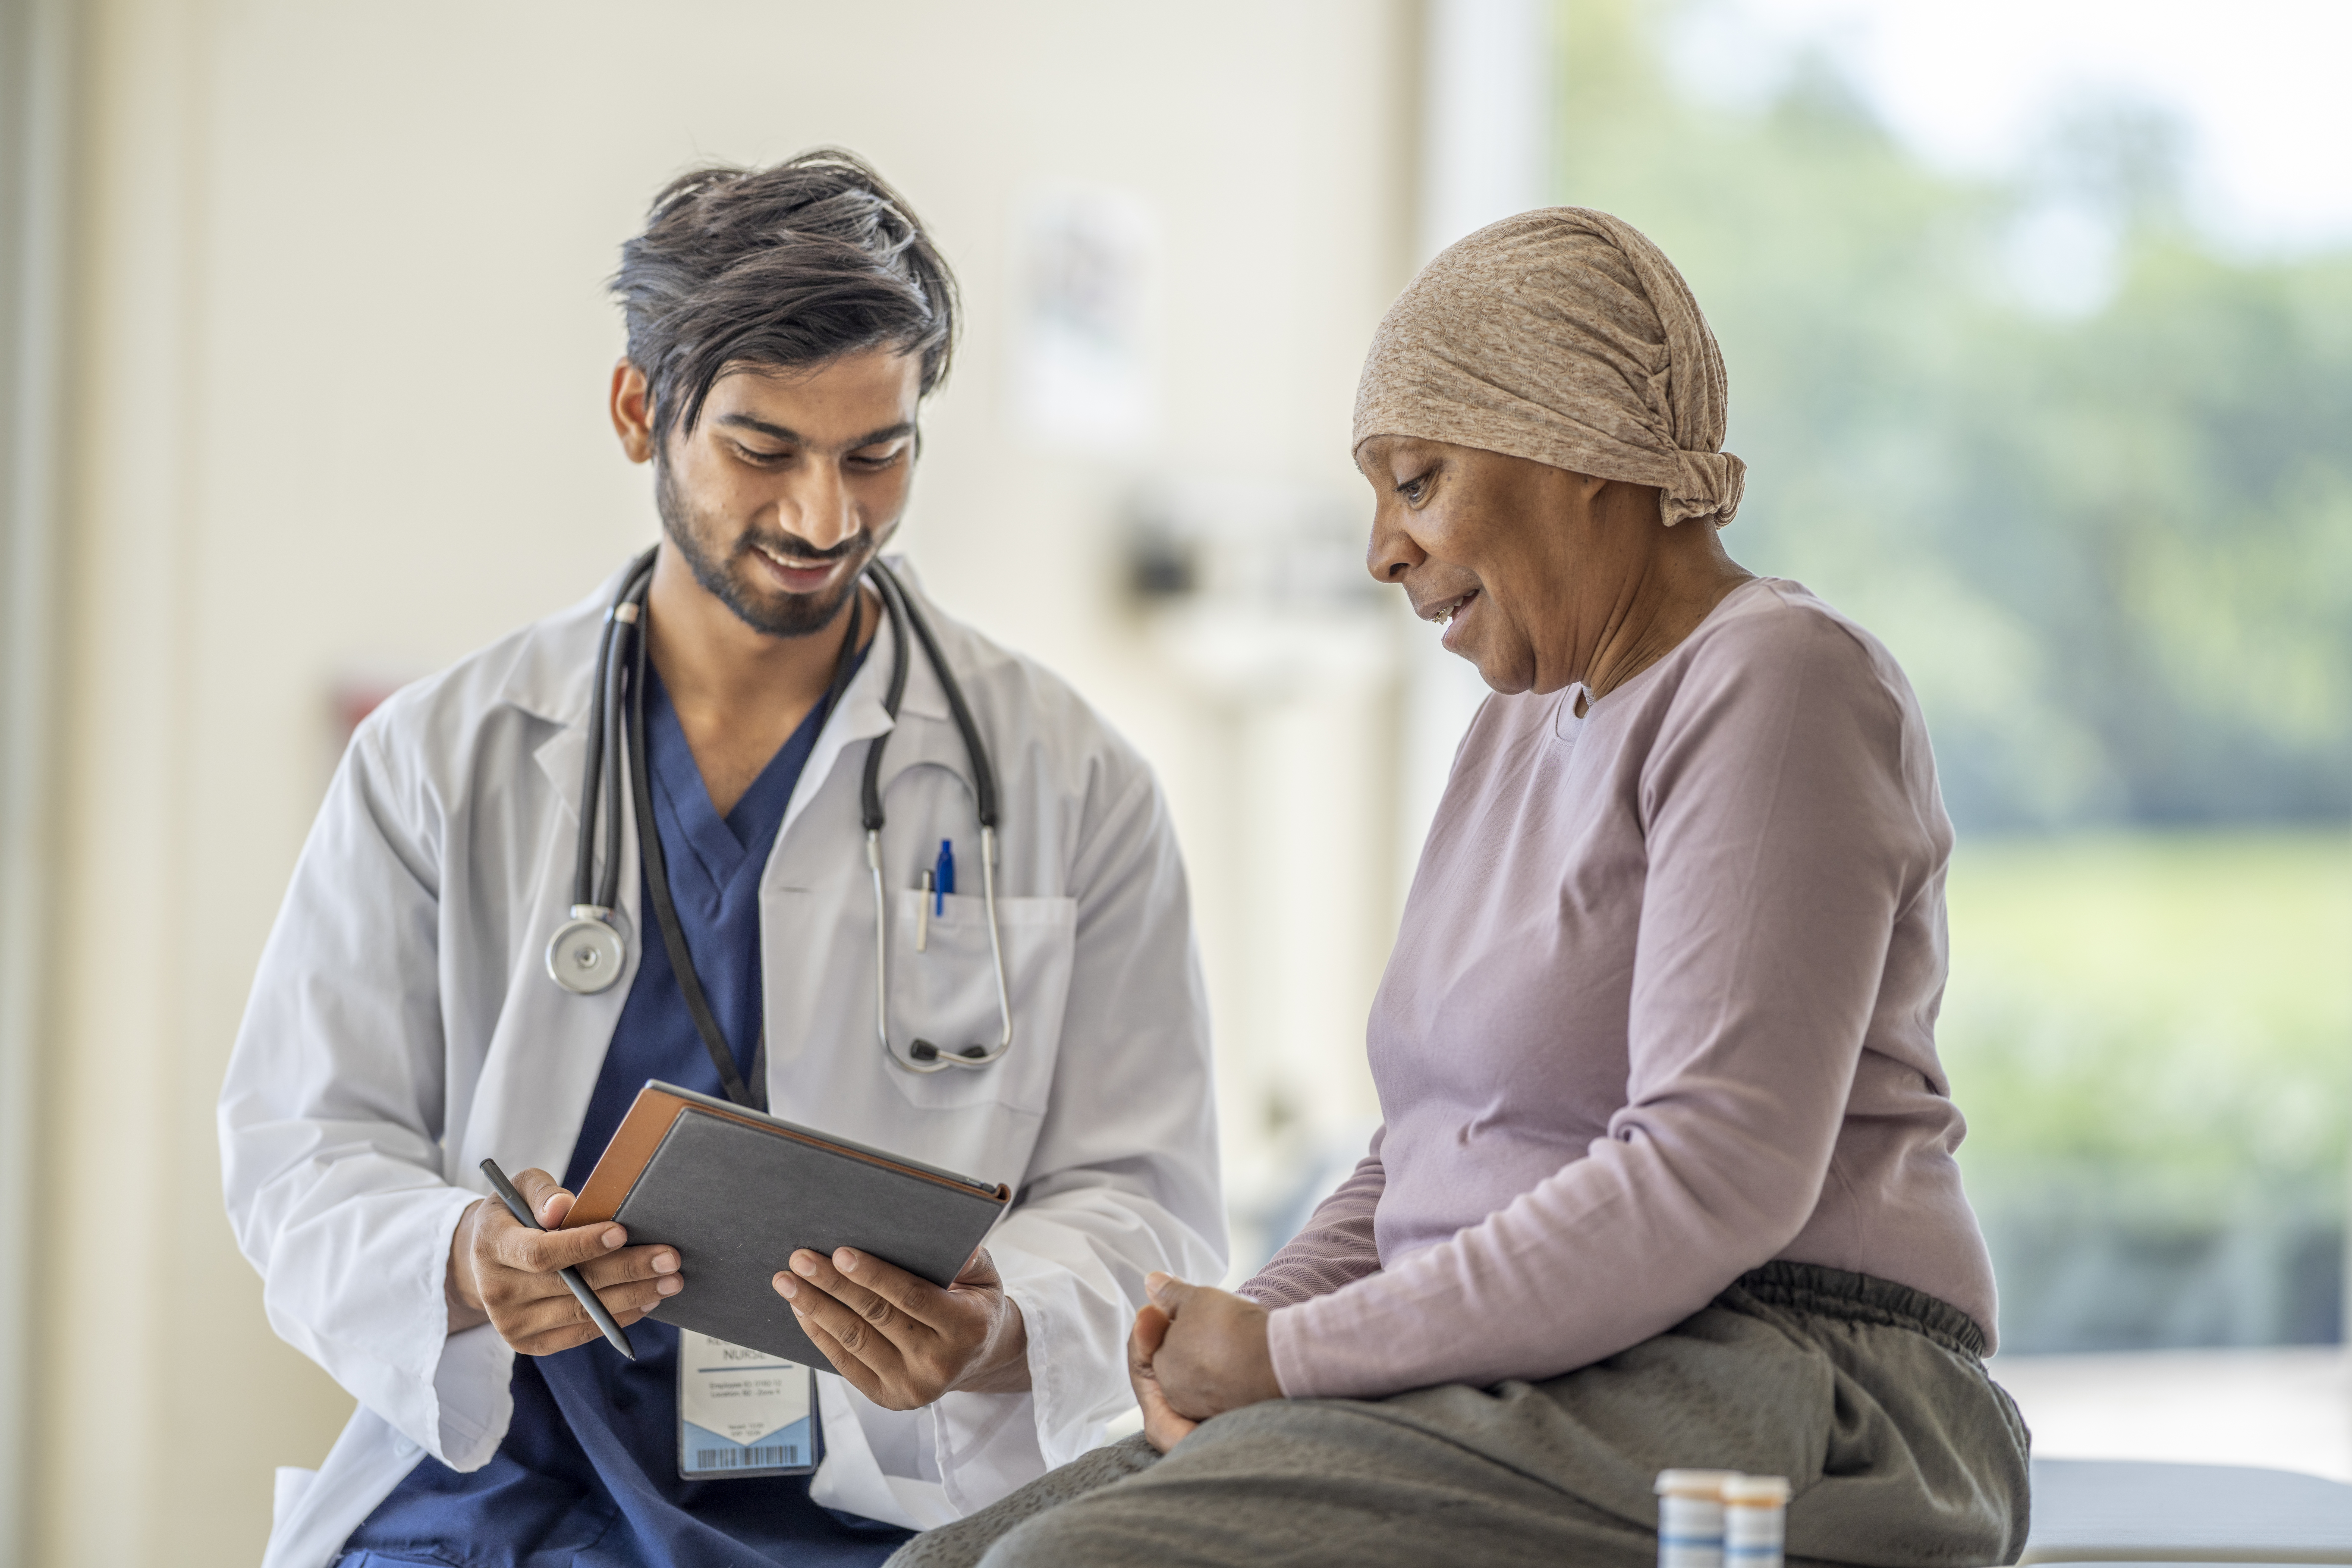 Middle Eastern appearance male oncologist talking to an older Black Female Patient about Claudin18.2 related CAR T cell and cancer vaccine therapies.